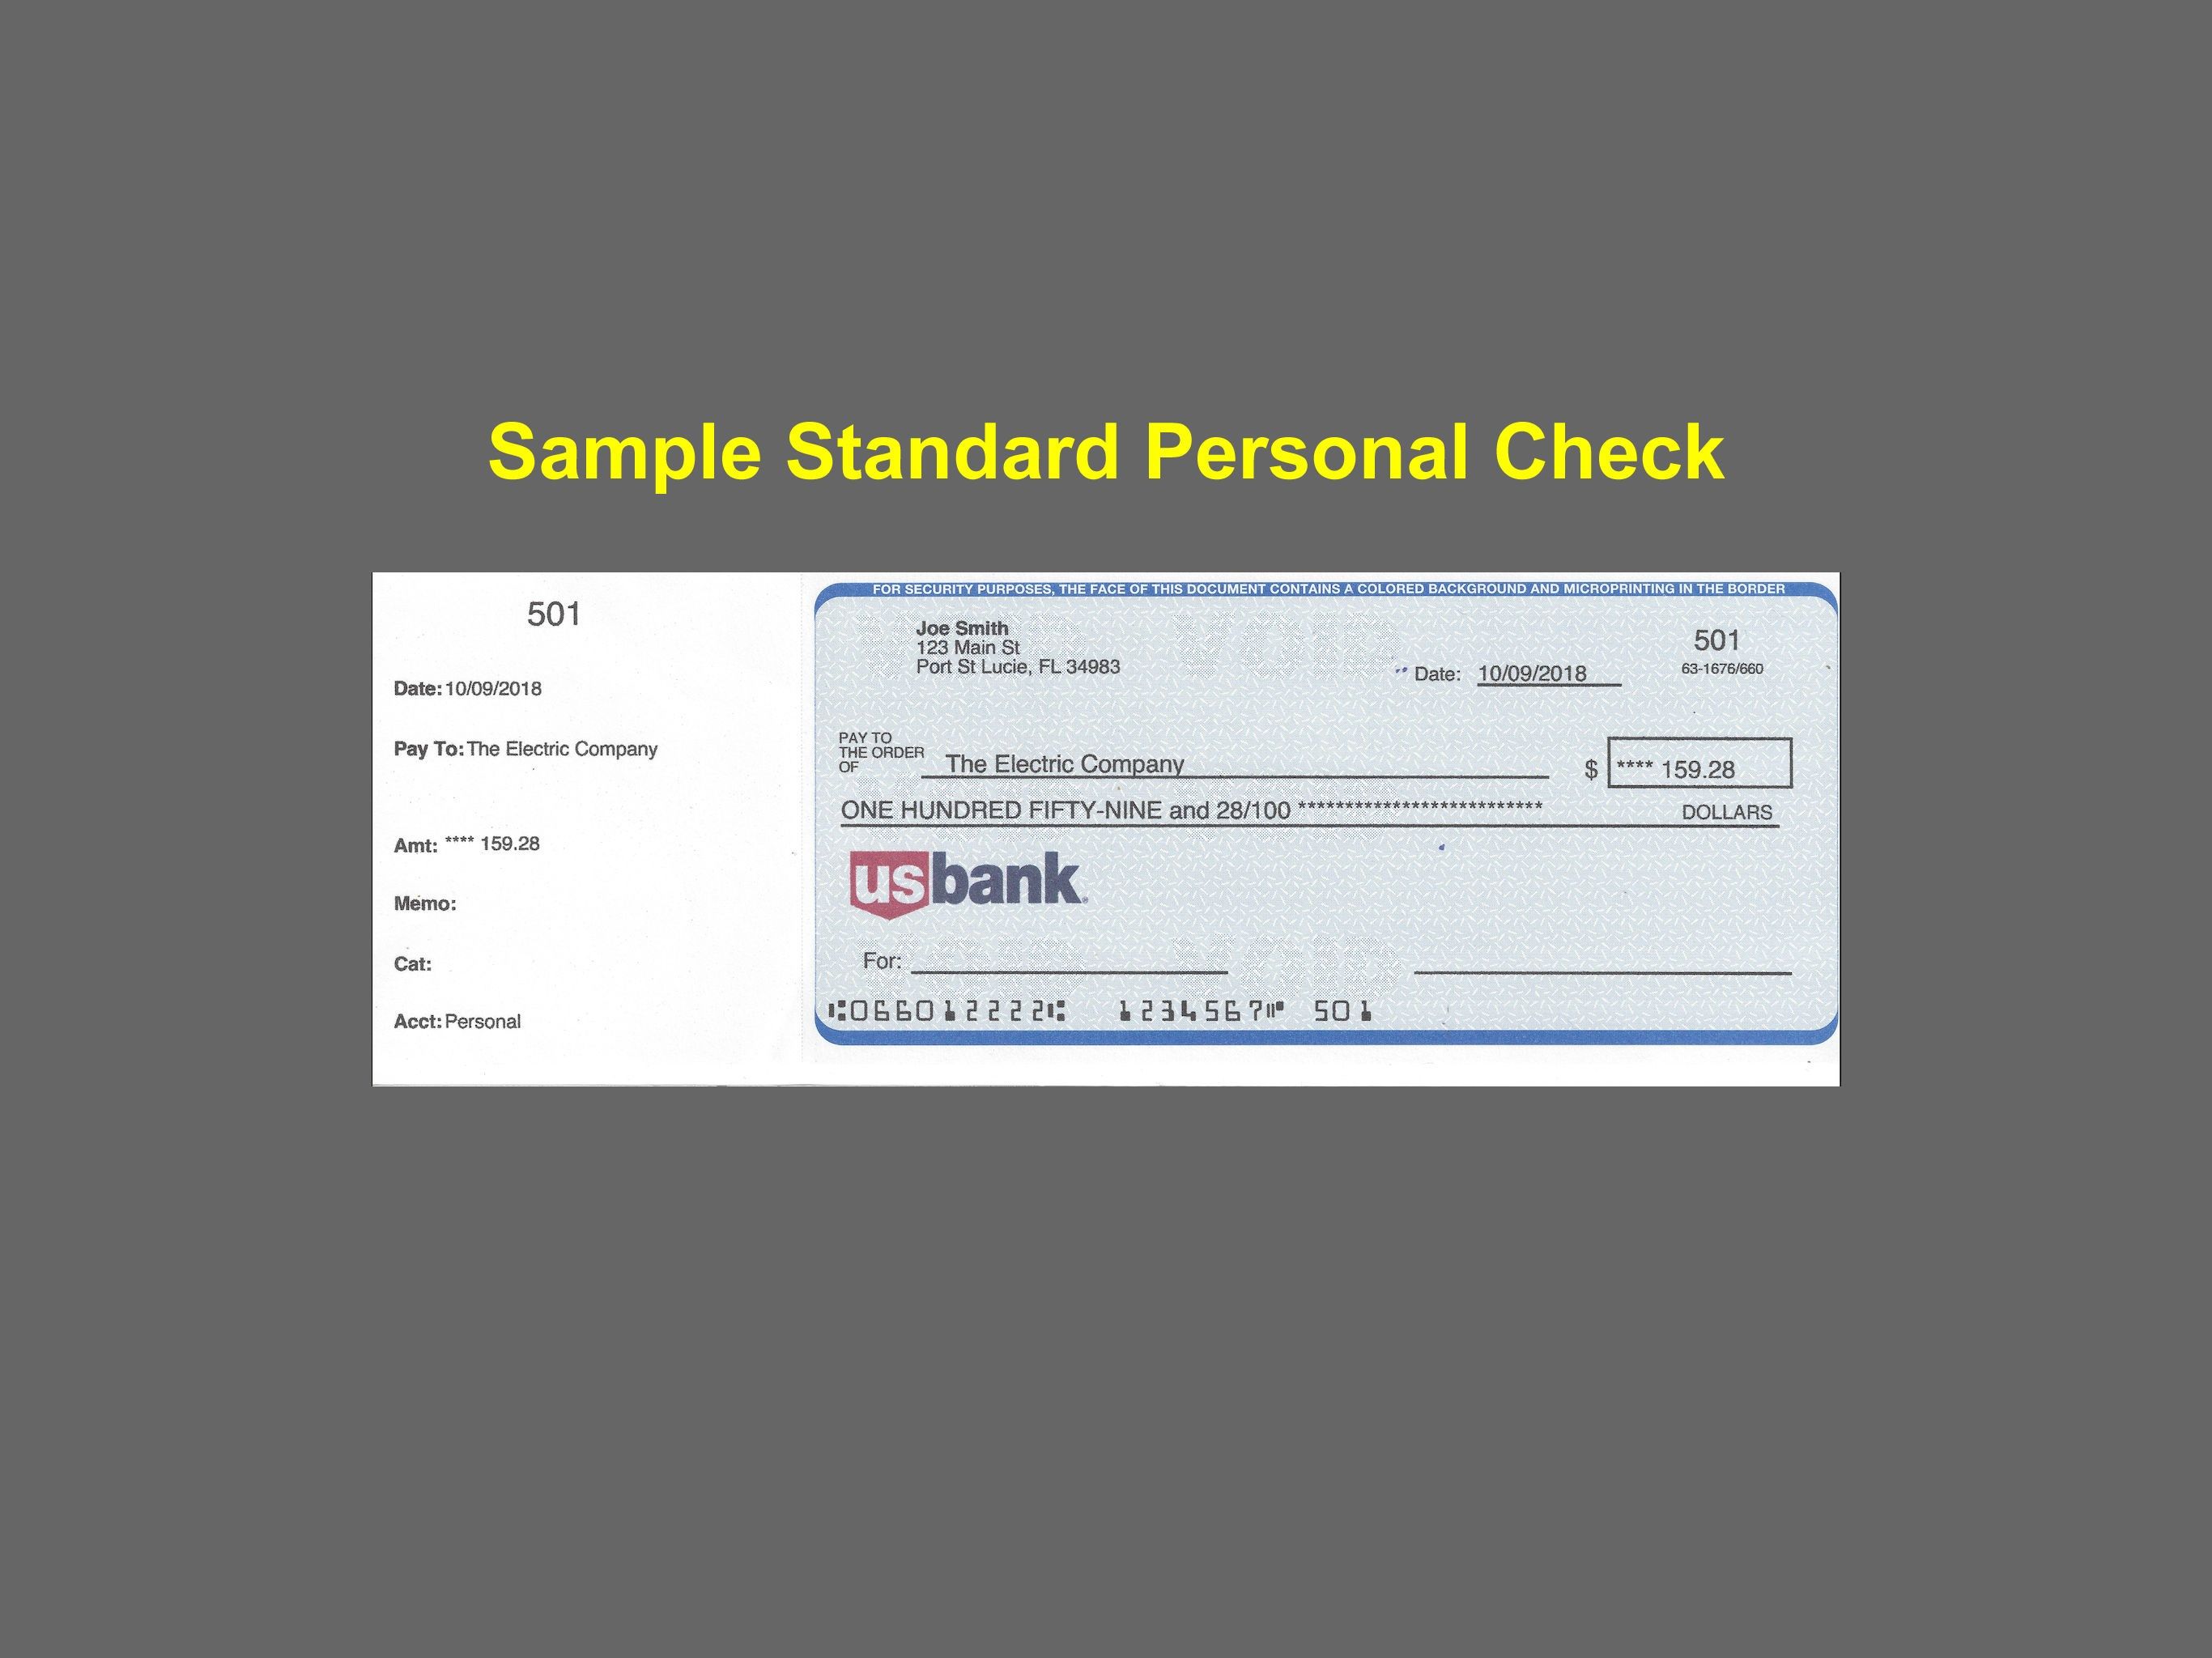 Standard Personal, just like you get from a bank. Printed on blank check stock.